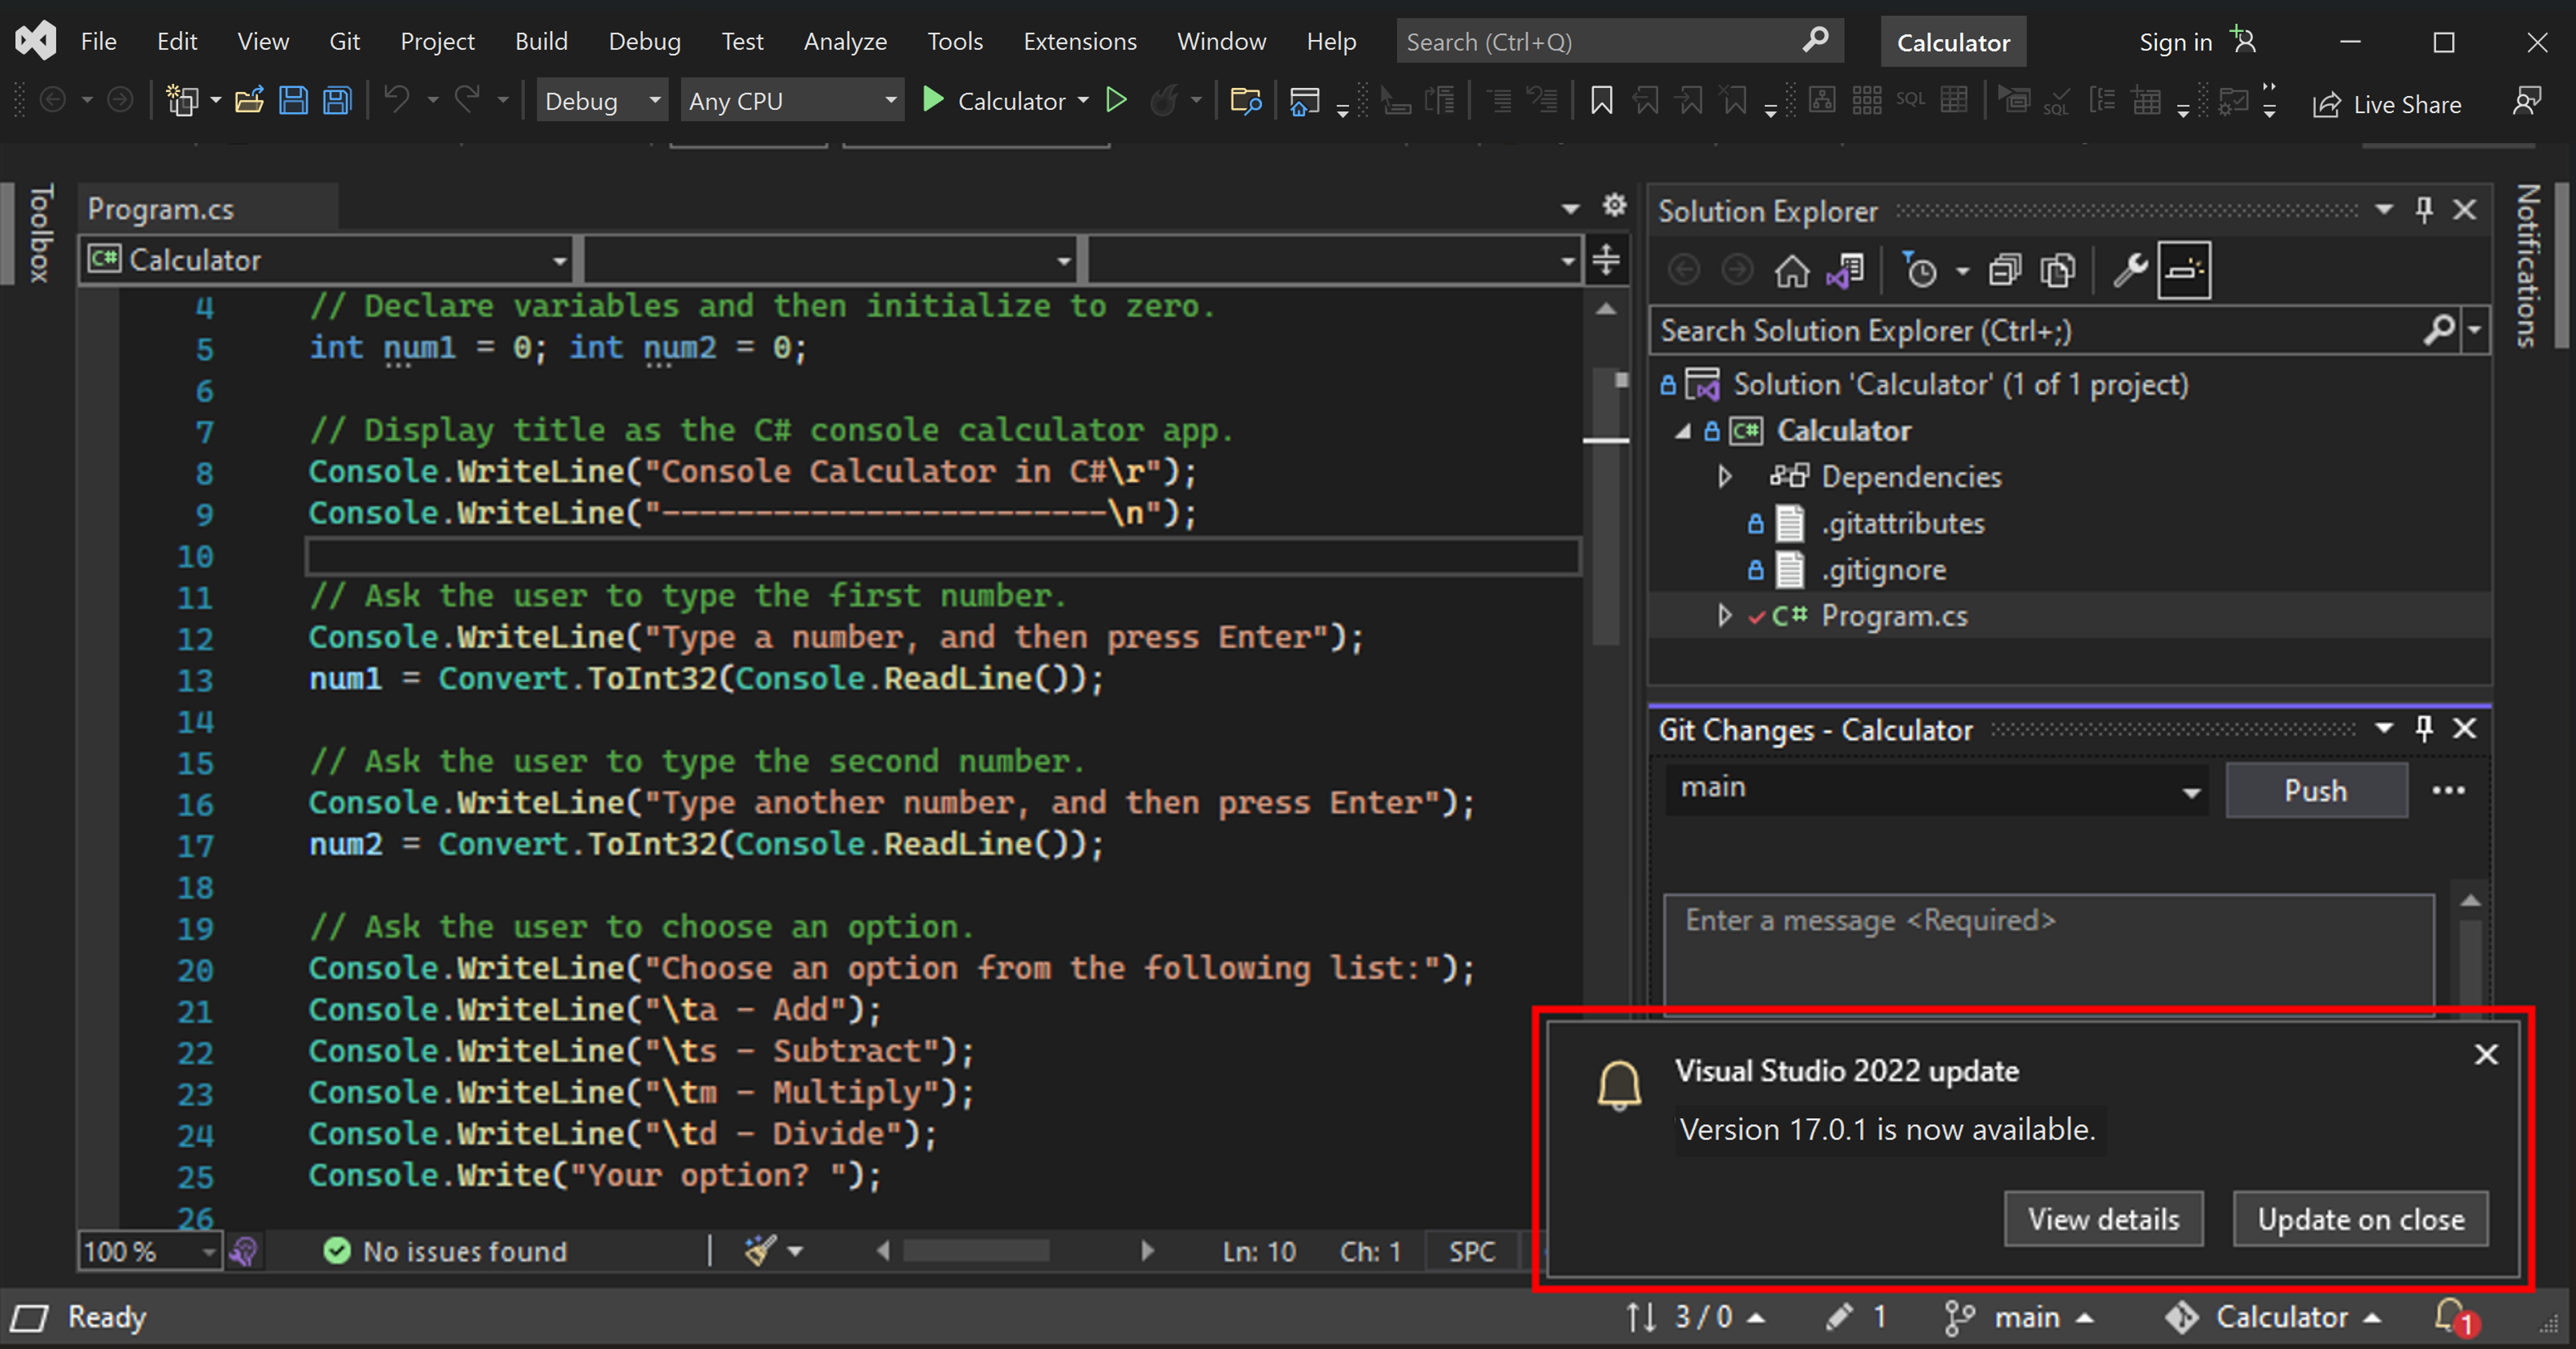 Screenshot showing an update message for Visual Studio 2022 in the lower-right corner of the Visual Studio IDE.